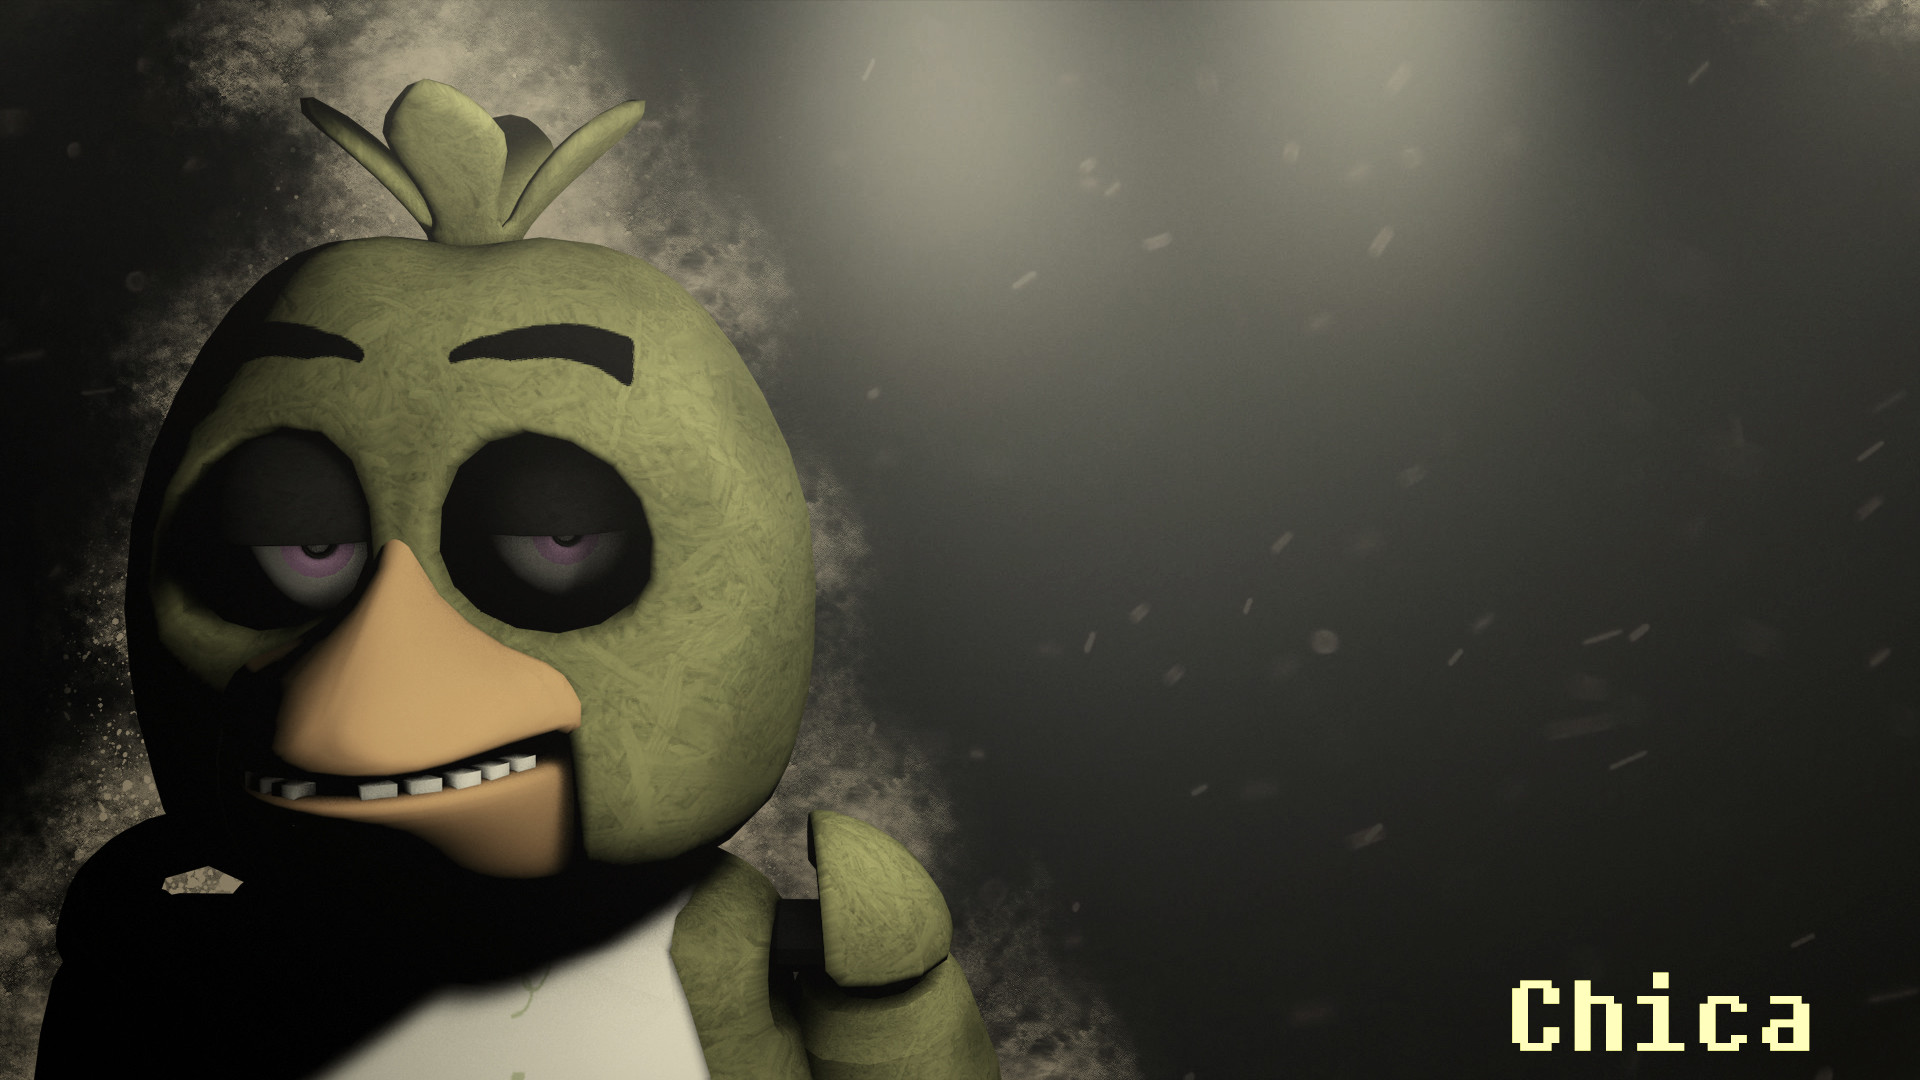 1920x1080 ... Five Nights at Freddy's Chica Wallpaper DOWNLOAD by NiksonYT